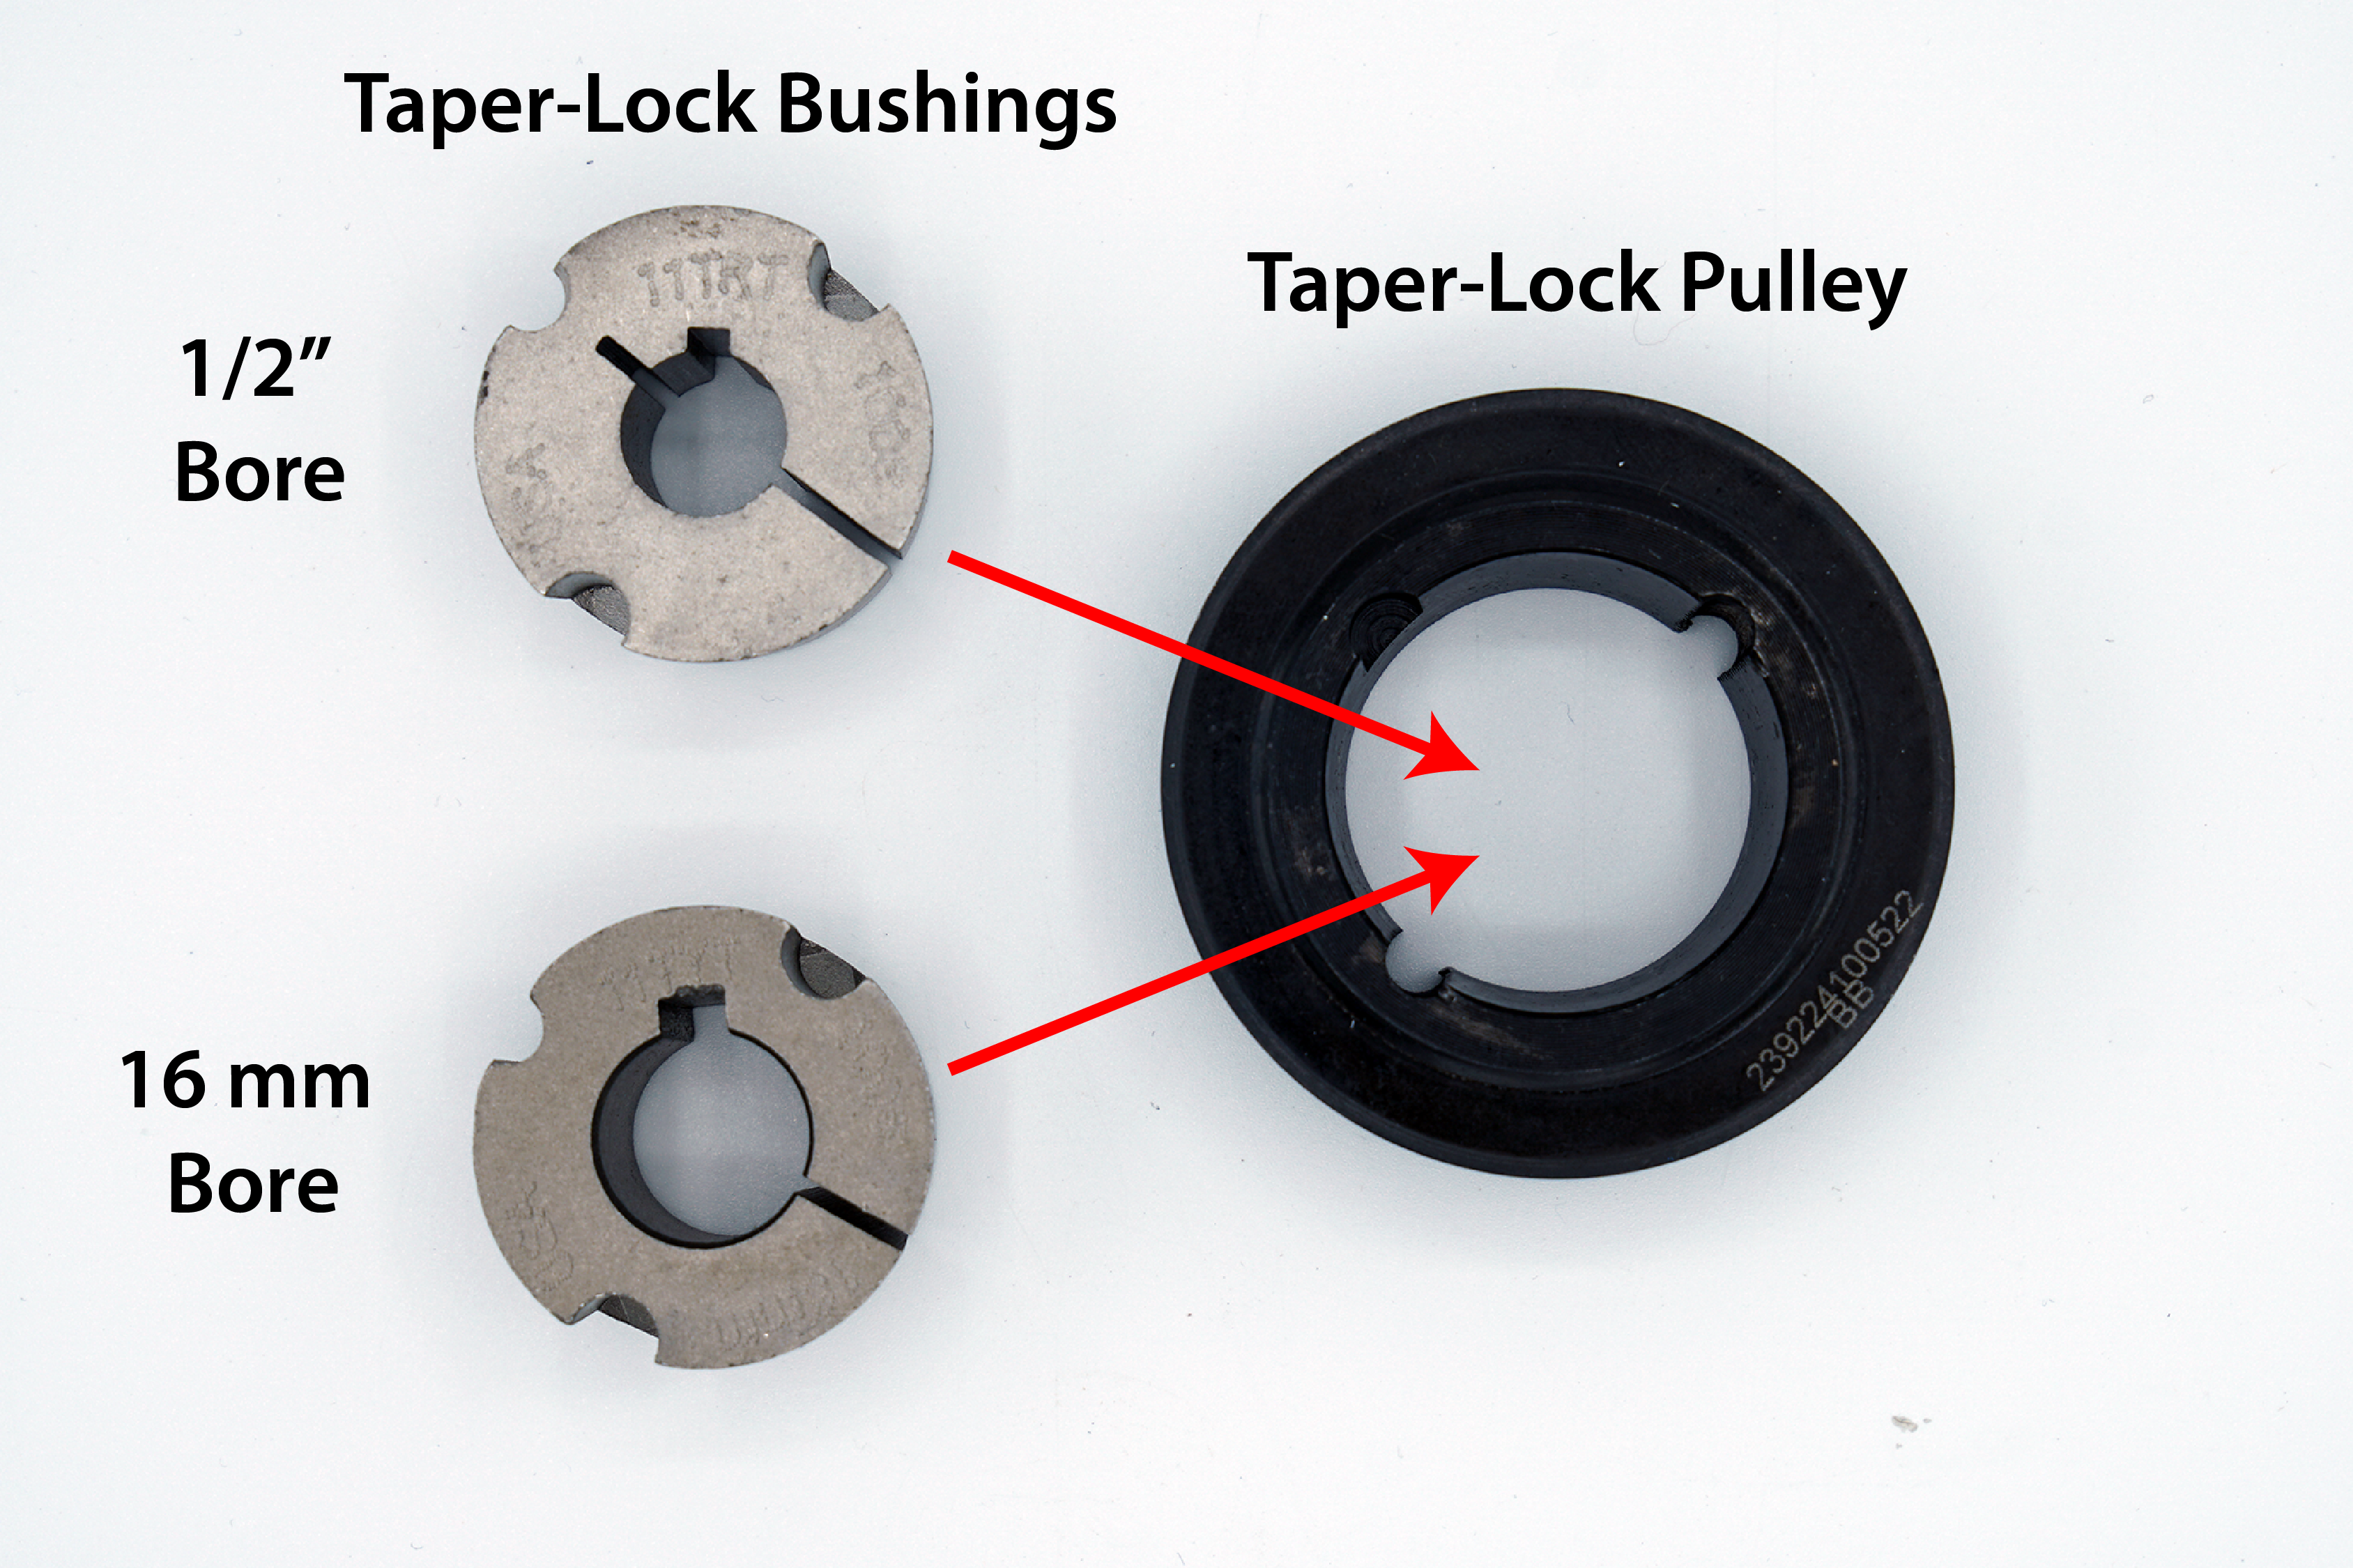 Taper Lock bushings and pulley used for CNC mill conversion